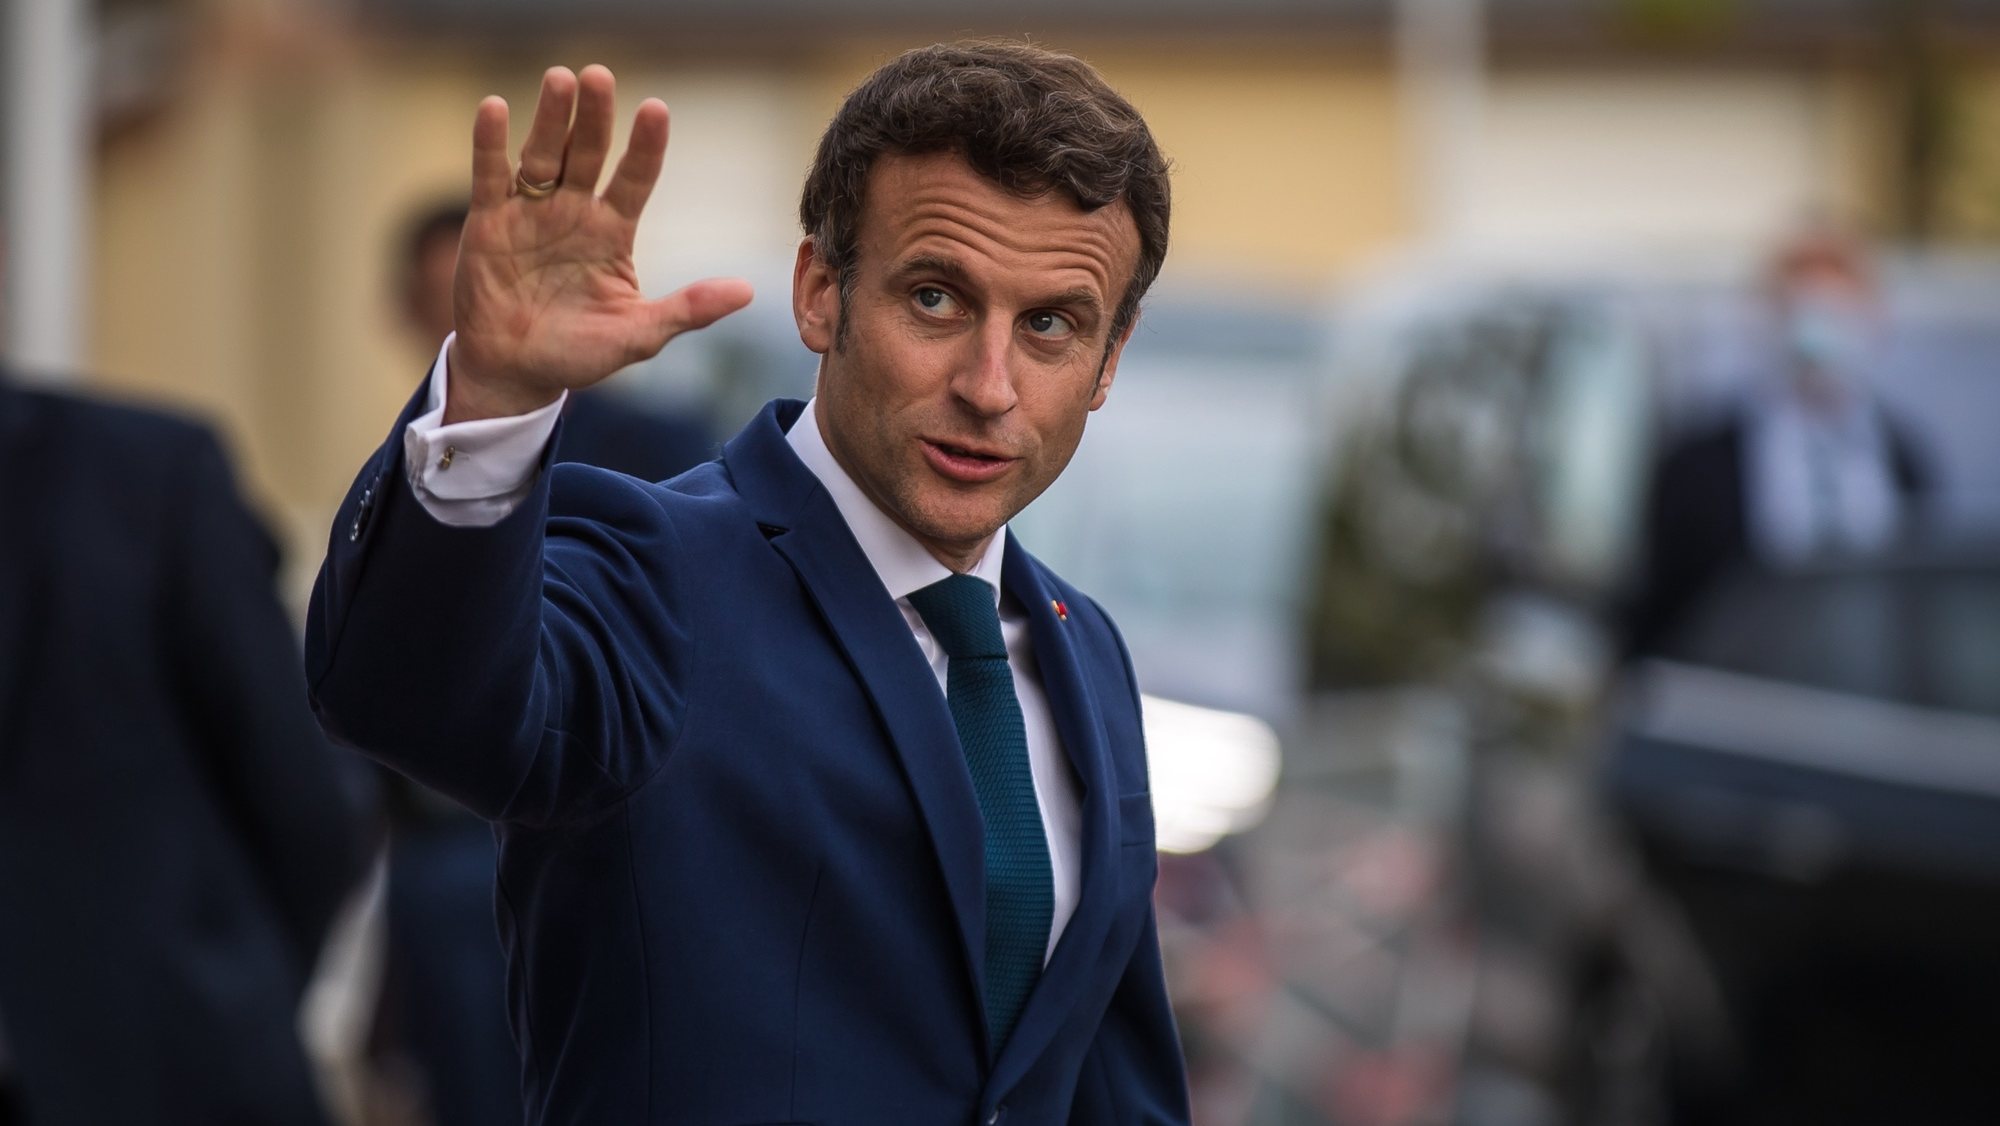 epa09914842 French President Emmanuel Macron waves as he leaves after his visit at the &#039;Percy&#039; Army Hospital in Clamart, near Paris, France, 28 April 2022. Macron met soldiers injured during external operations, and caregivers of the Percy Army Hospital.  EPA/CHRISTOPHE PETIT TESSON / POOL